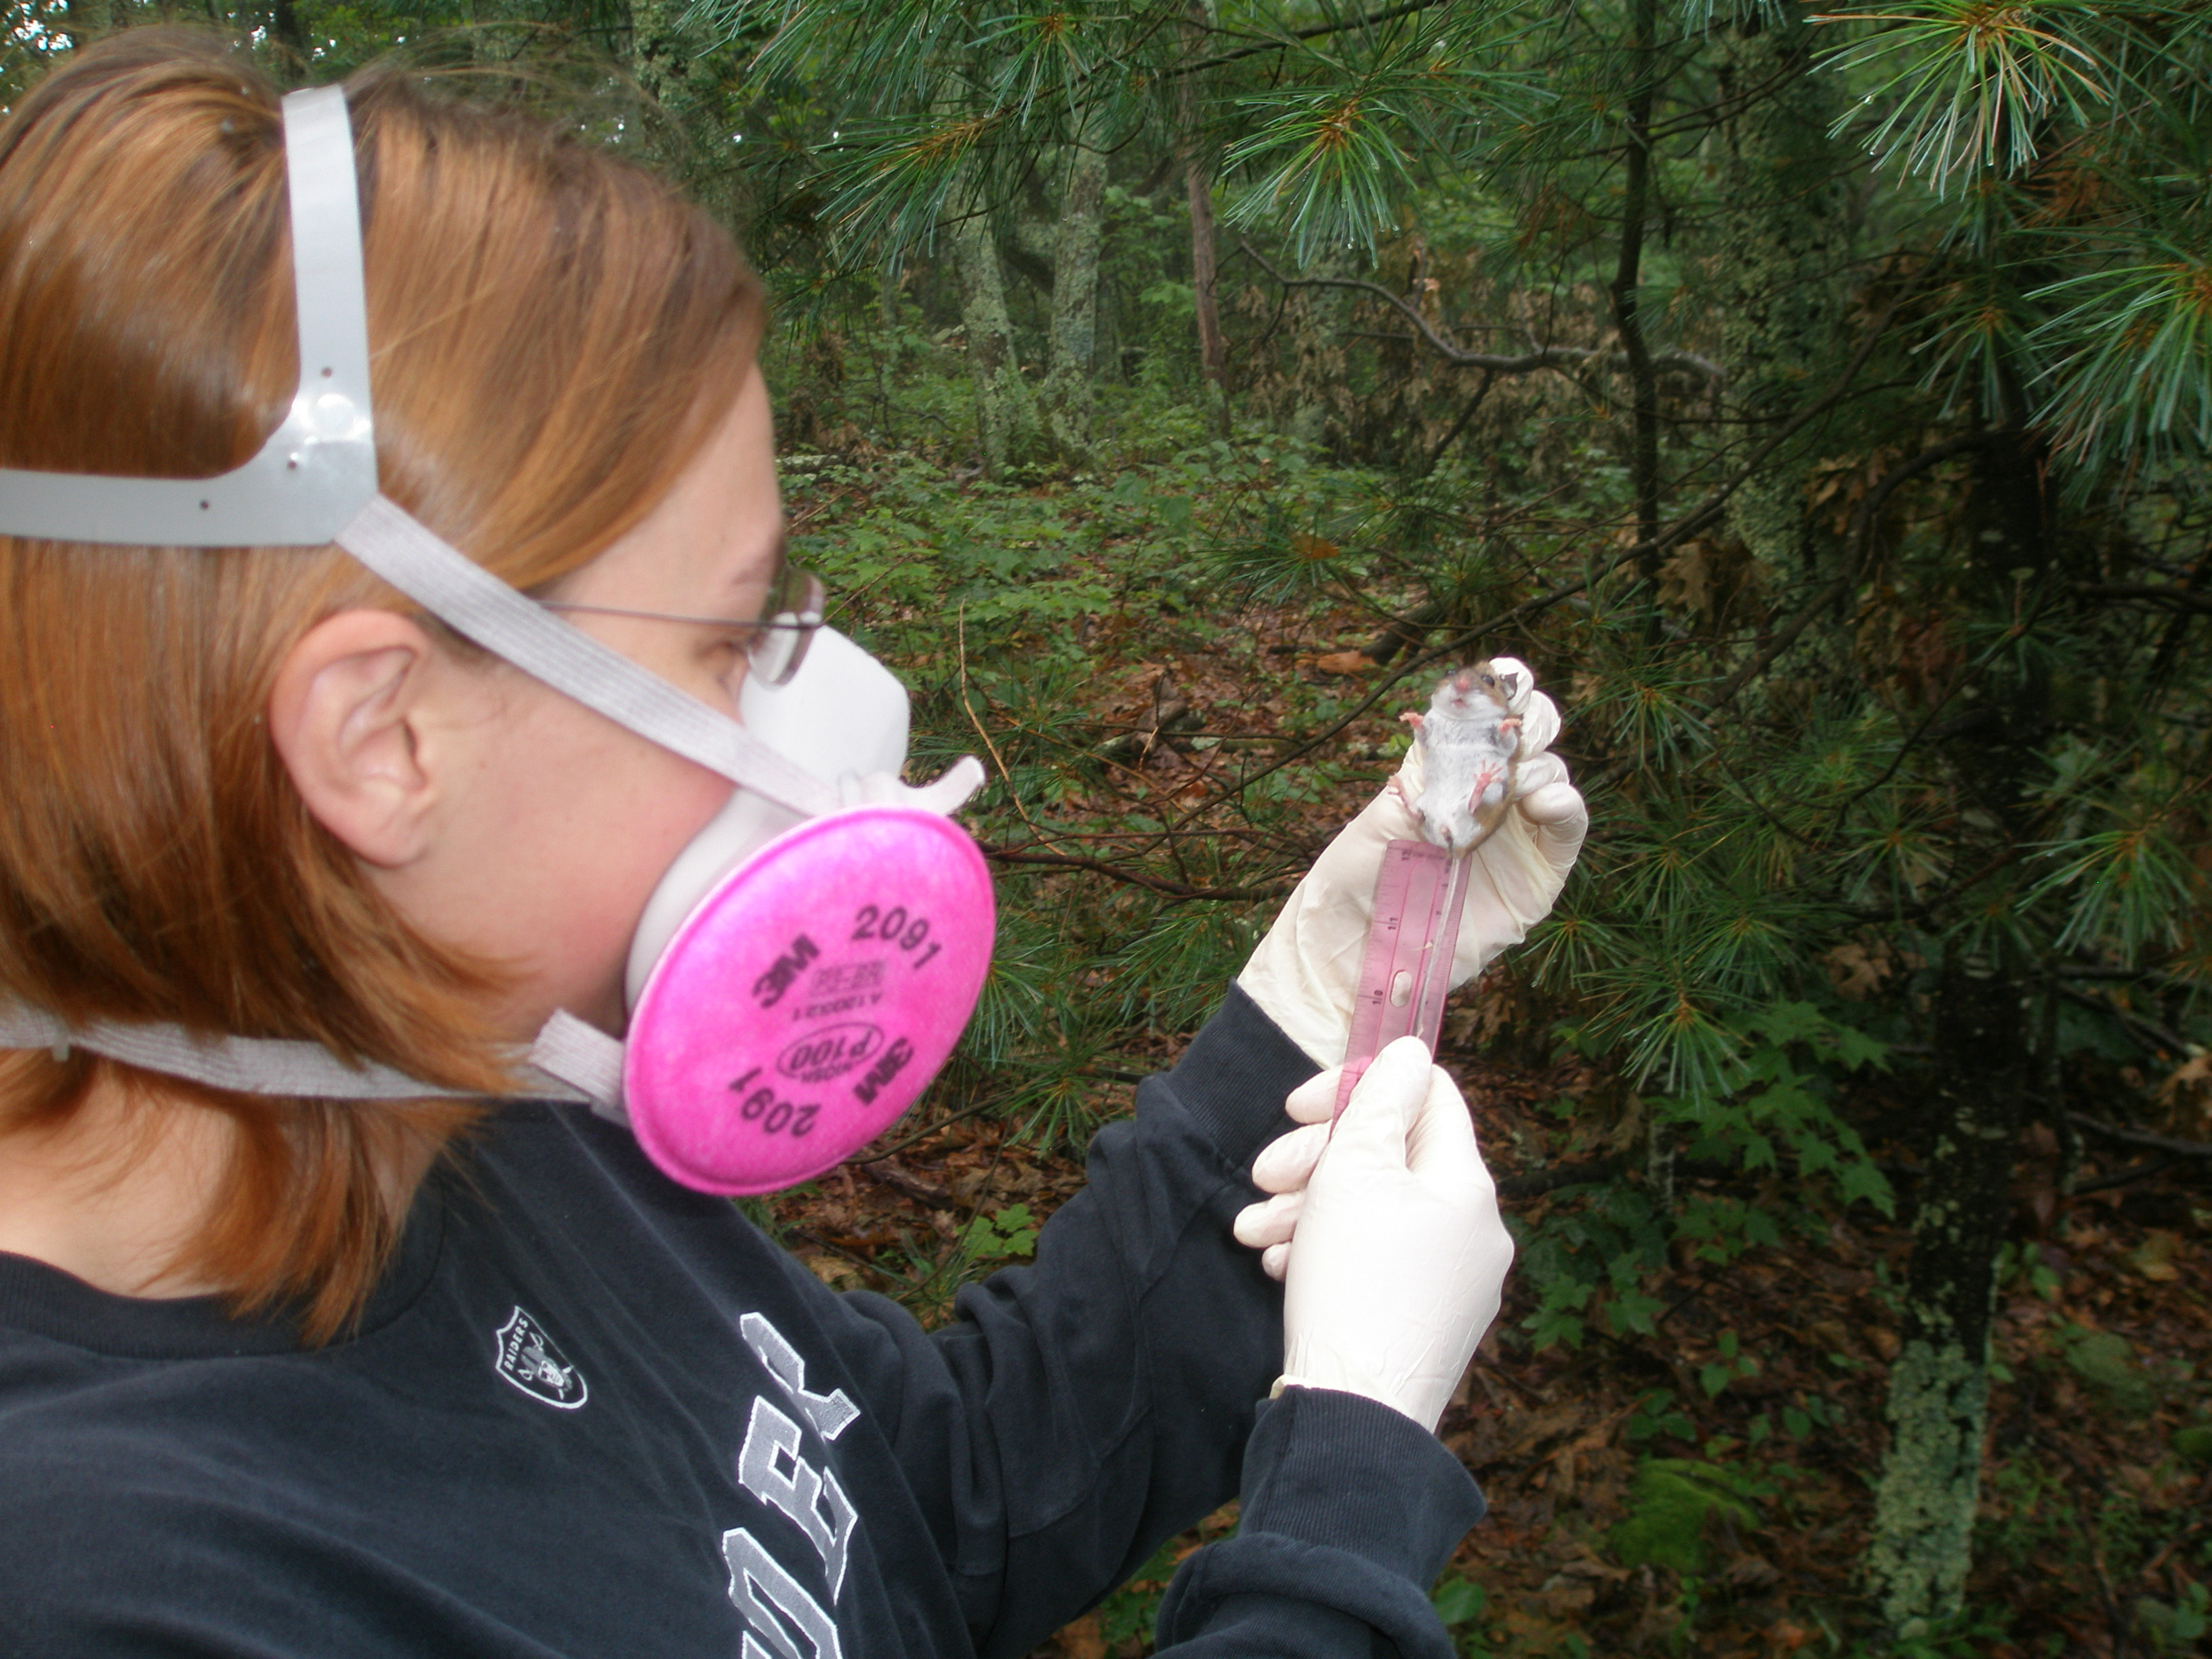 A woman wearing protective respiratory gear holds a mouse and measures the length of its tail in a wooded setting.